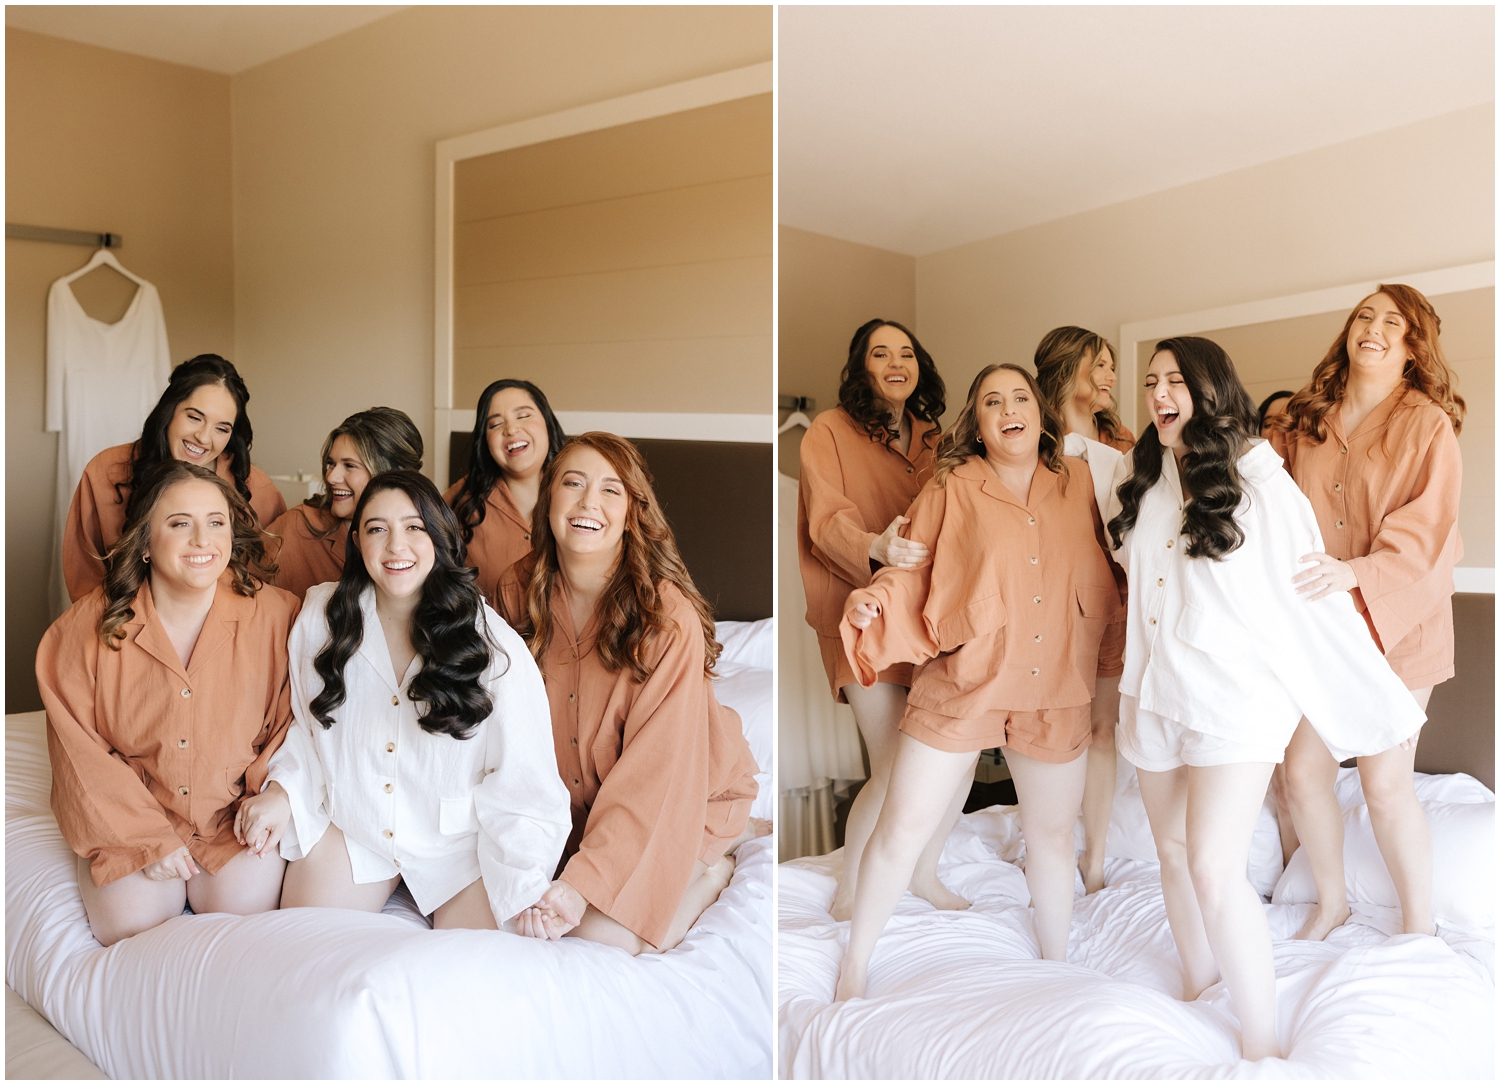 Bride and her friends jump on the bed on her wedding day in Tampa, FL